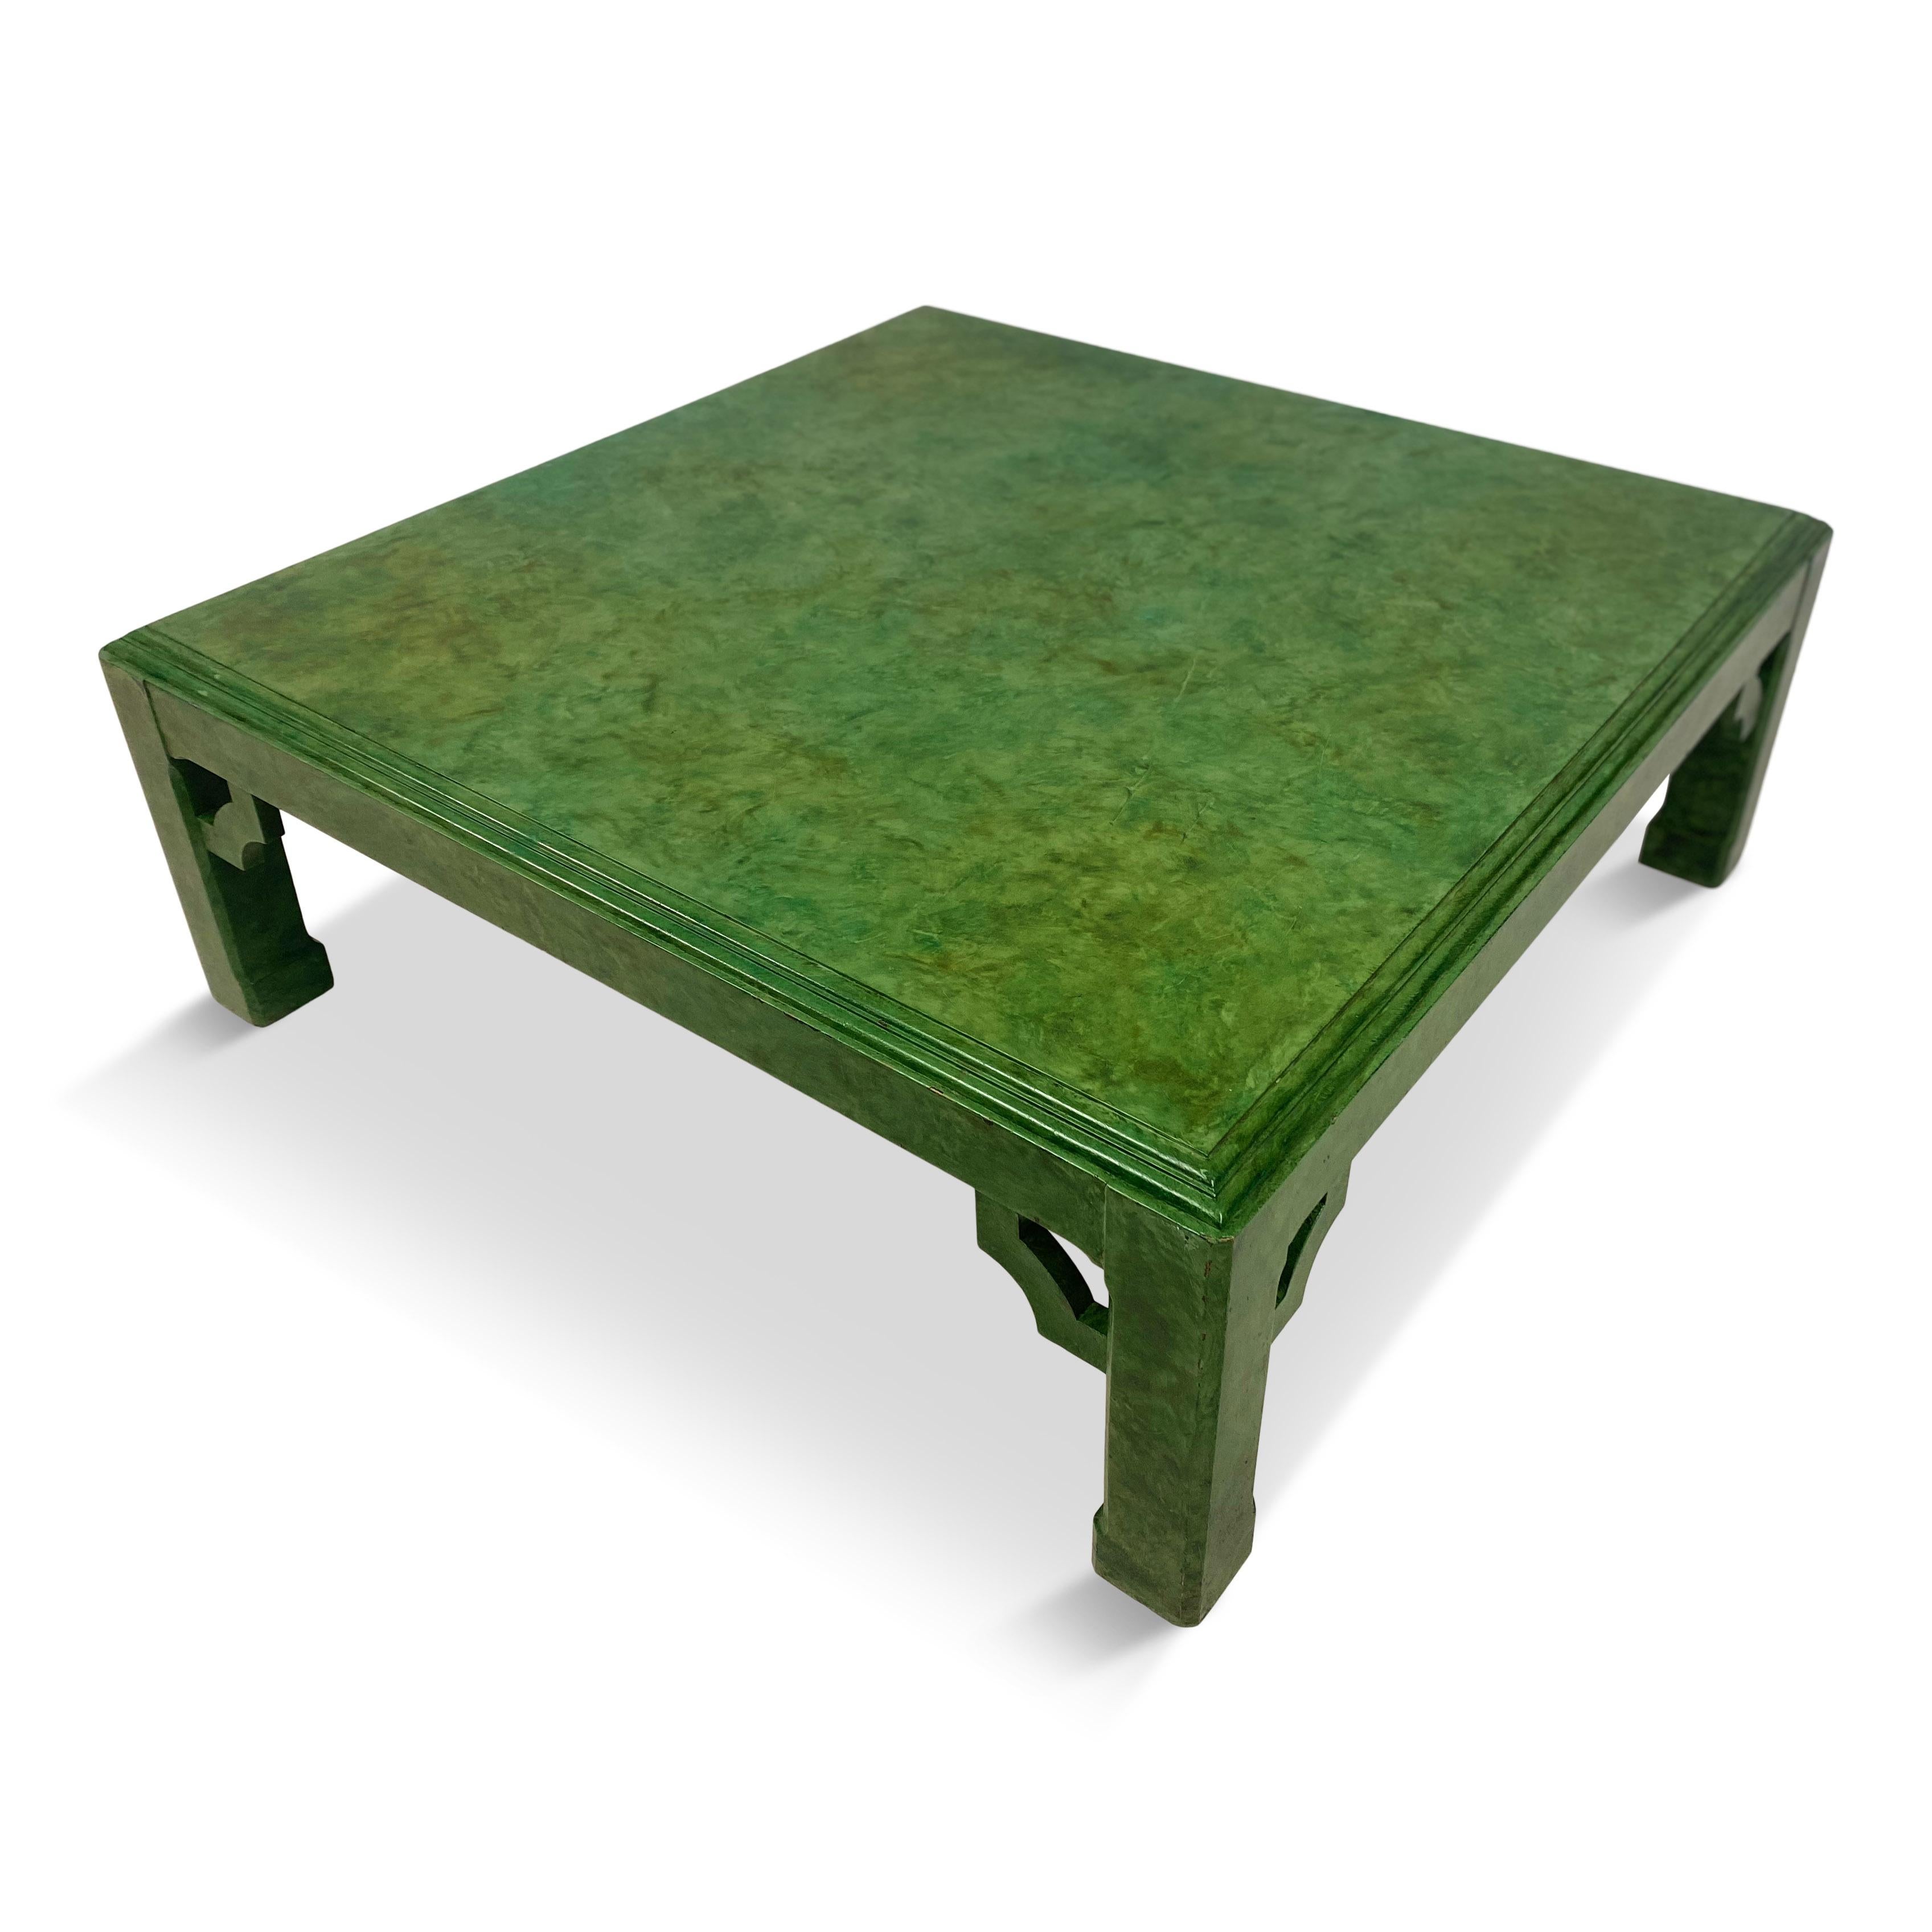 Coffee table

Scumbled green paint

Simulated marble effect

Classical details

Probably painted by Graham Carr

Late 20th Century U.K
 